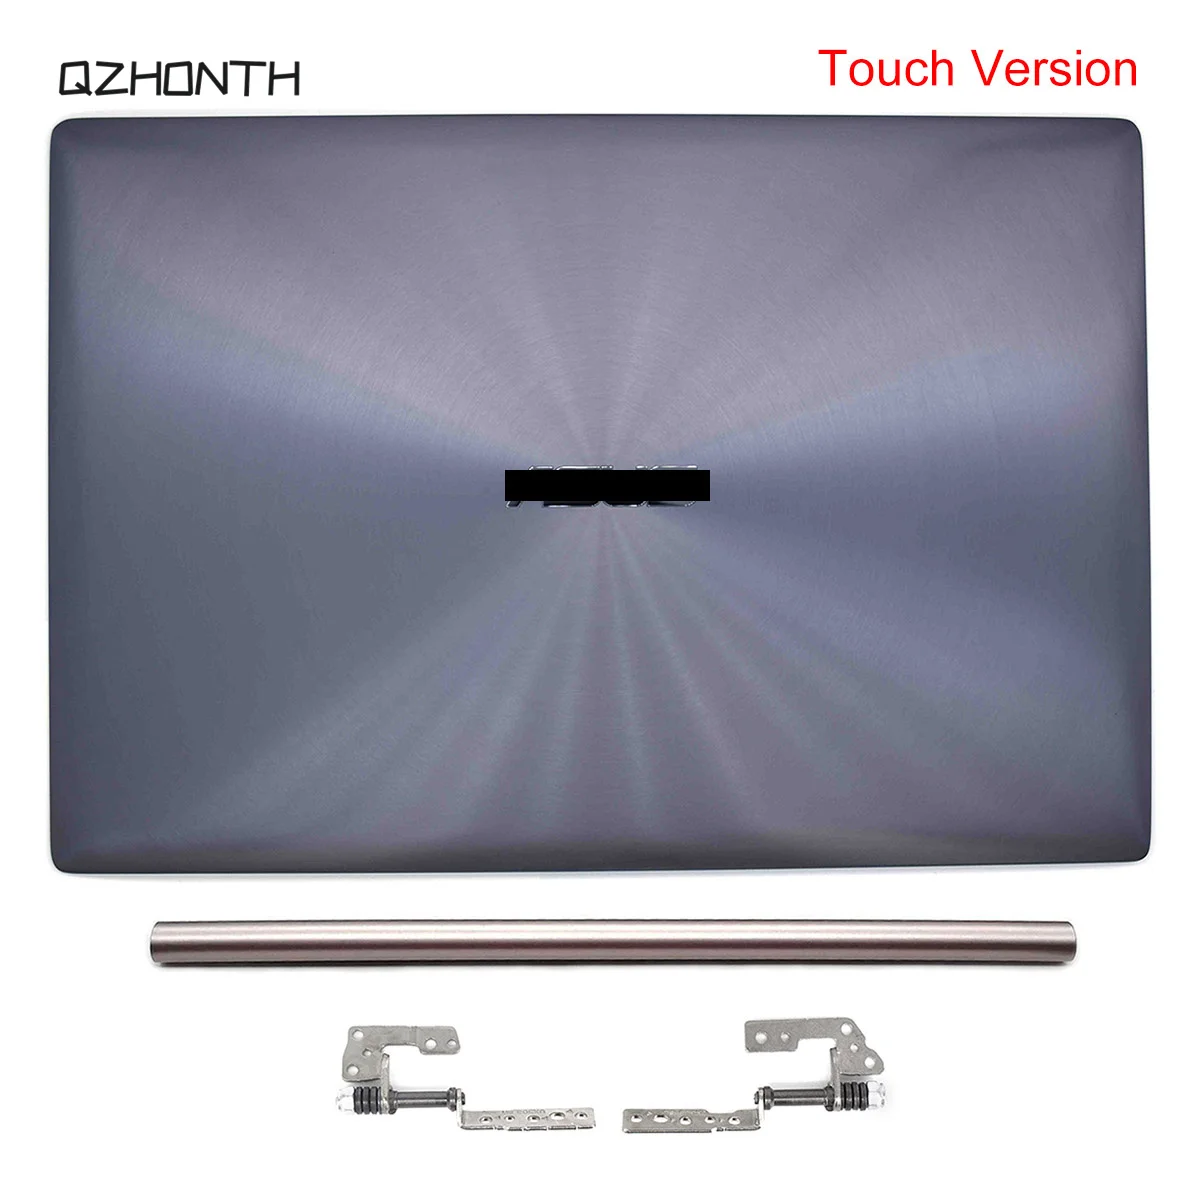 

New For ASUS UX303 UX303L UX303U U303L UX303LA UX303LN LCD Back Cover + Hinges + Cover Gray (Touch Version)